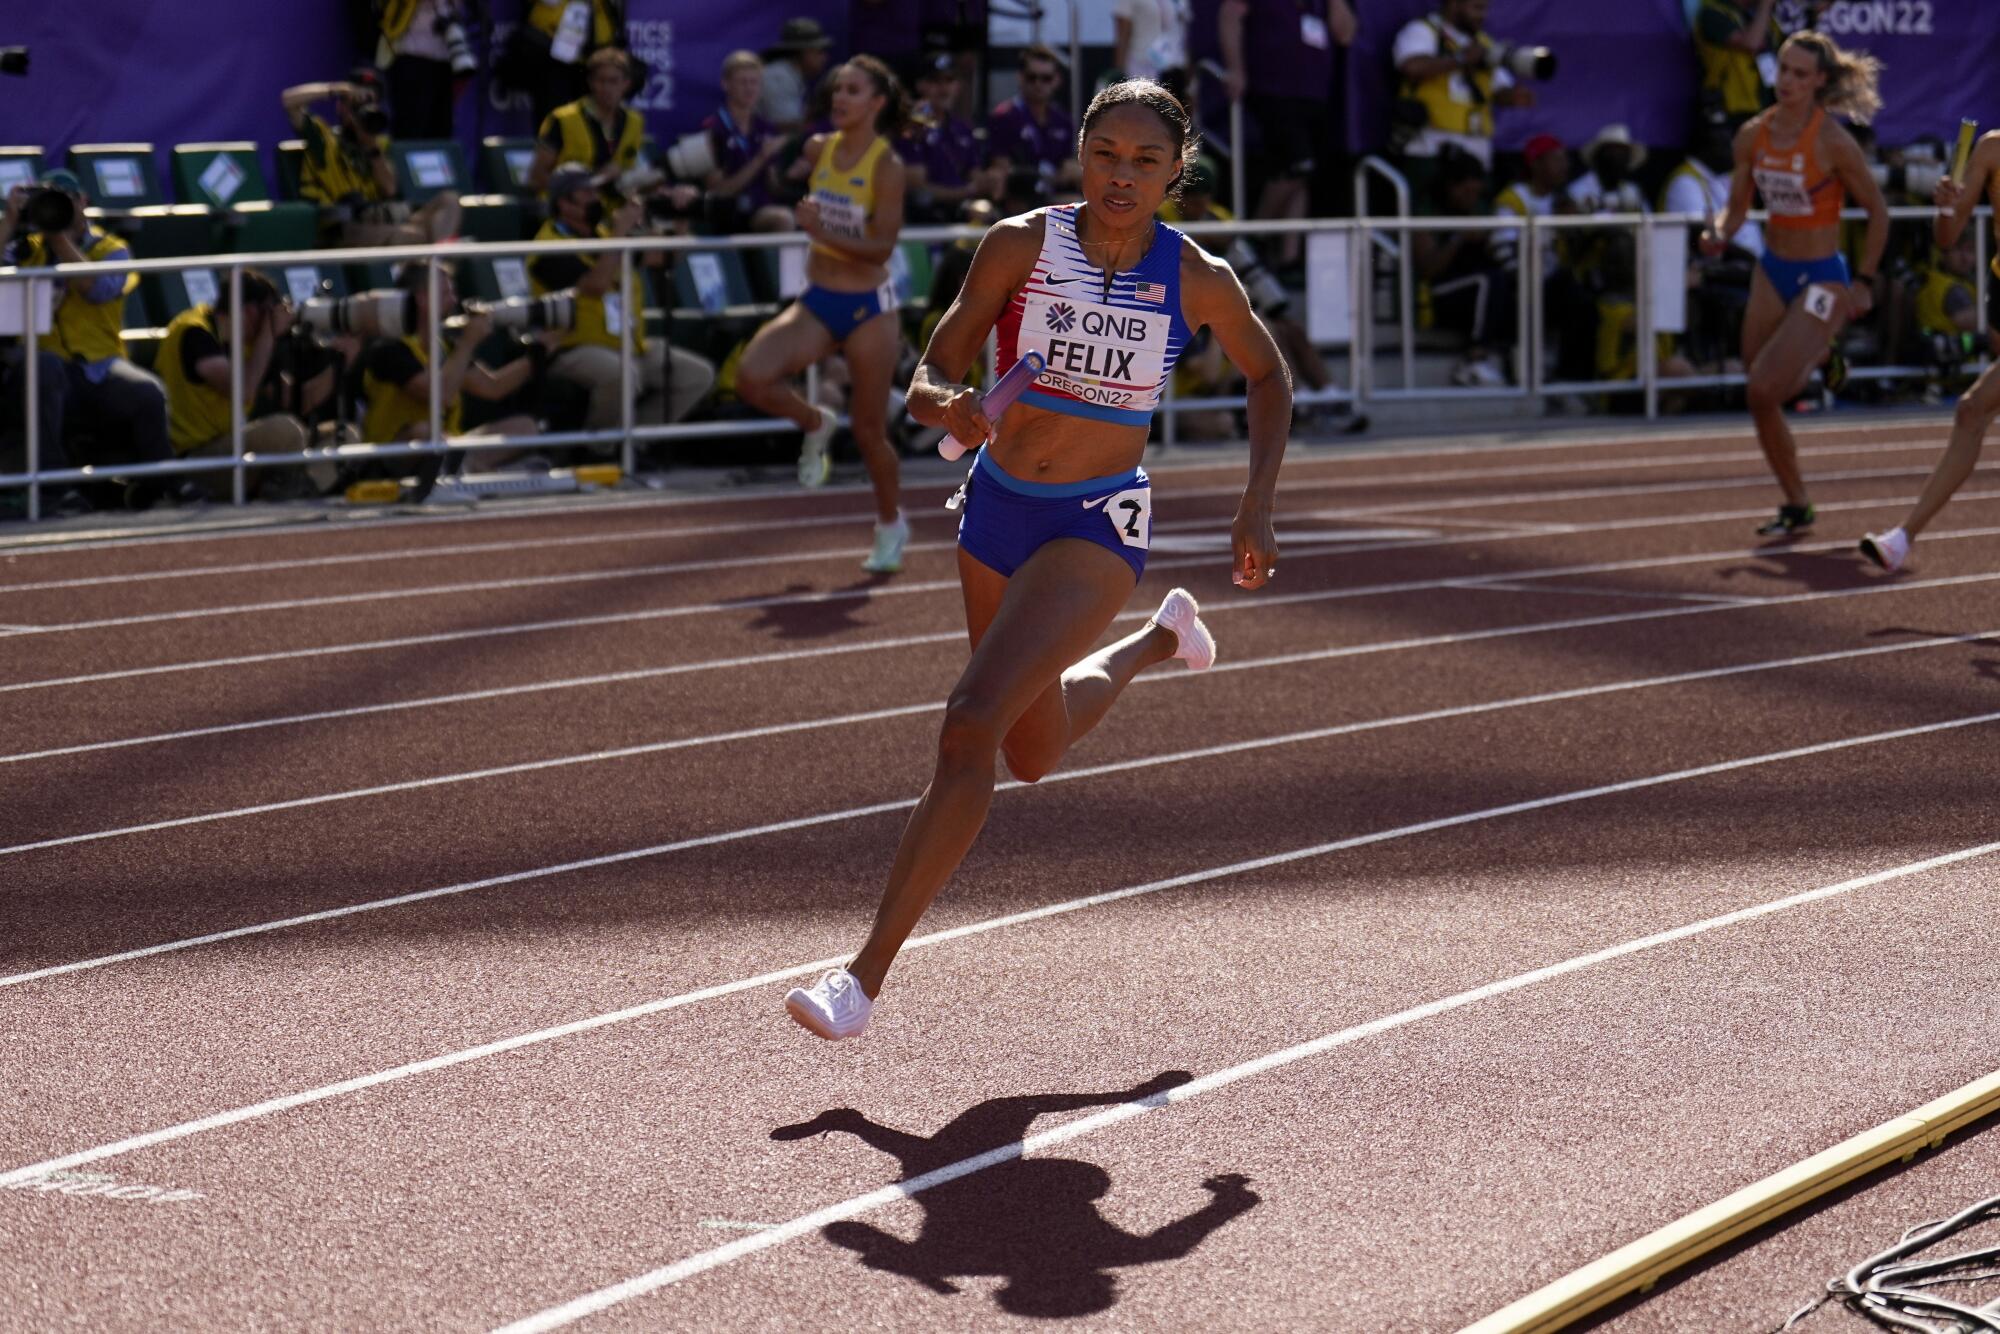 Allyson Felix carries the baton in the women's 4x400 relay final at the world championships in July 2022.